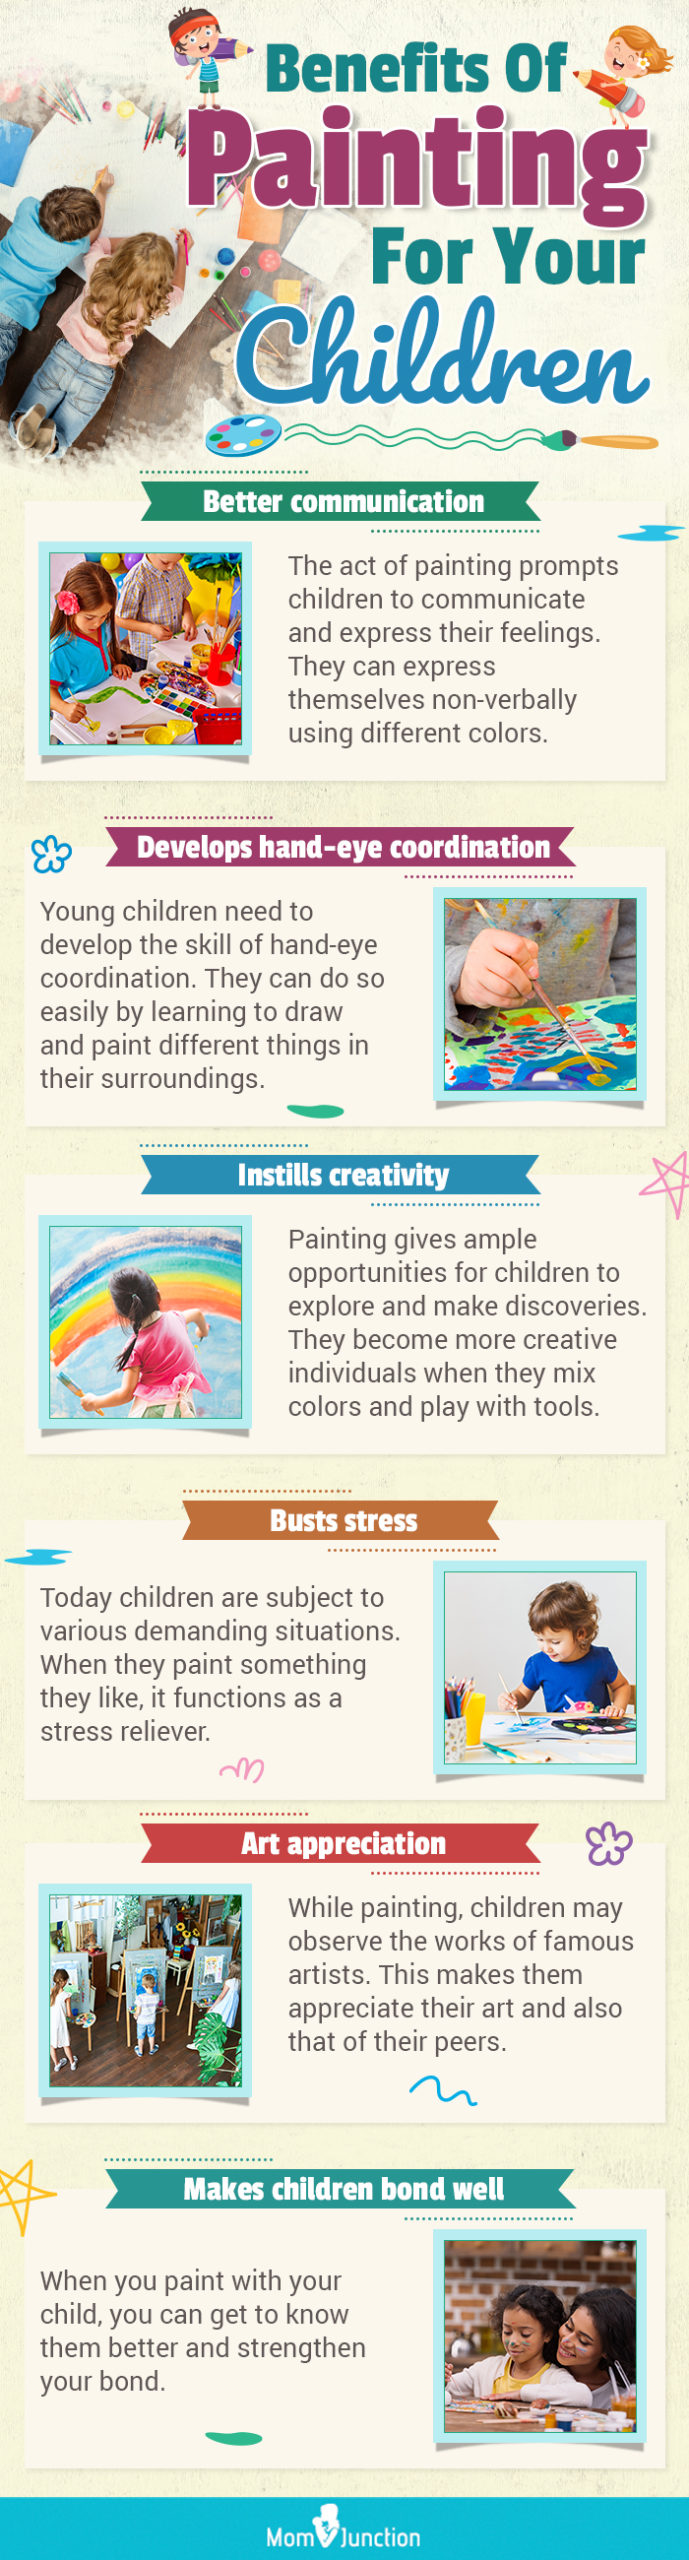 benefits of painting for your children (infographic)